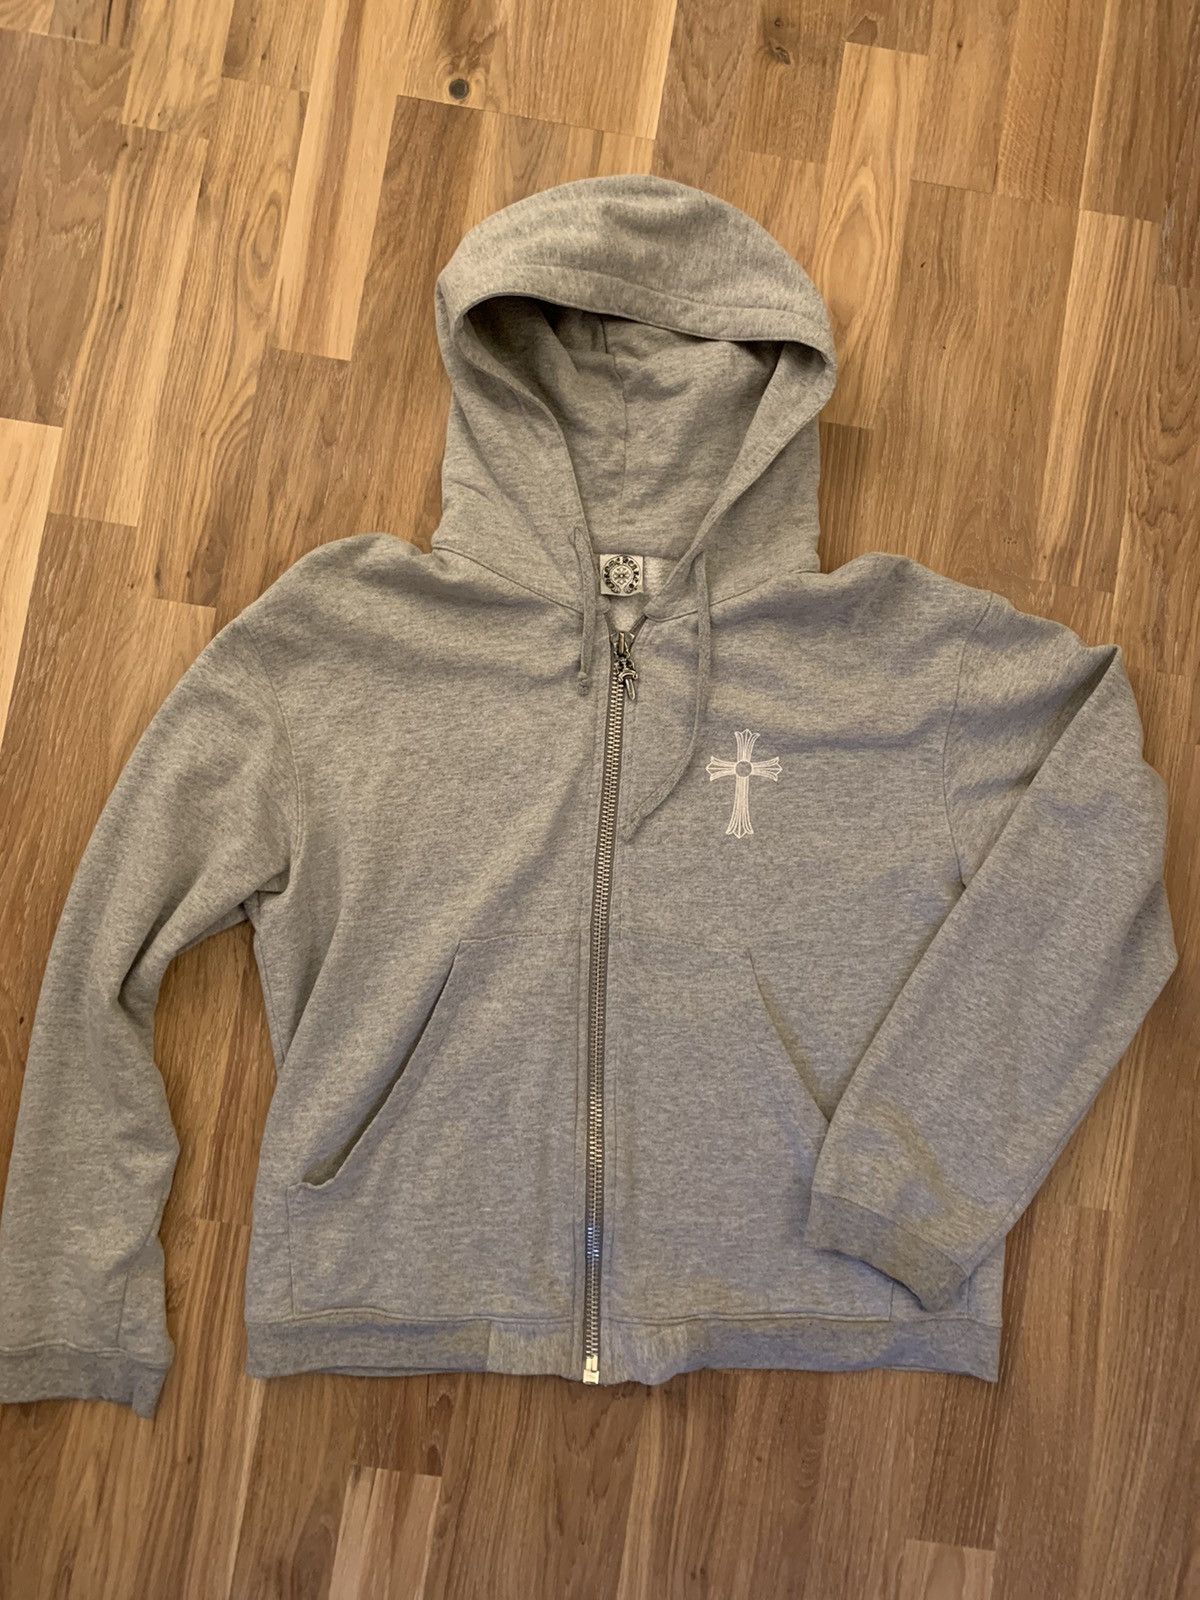 Chrome Hearts Very Rare Cross Zip Up Hoodie Grey Silver Dagger Vintage Size US S / EU 44-46 / 1 - 1 Preview